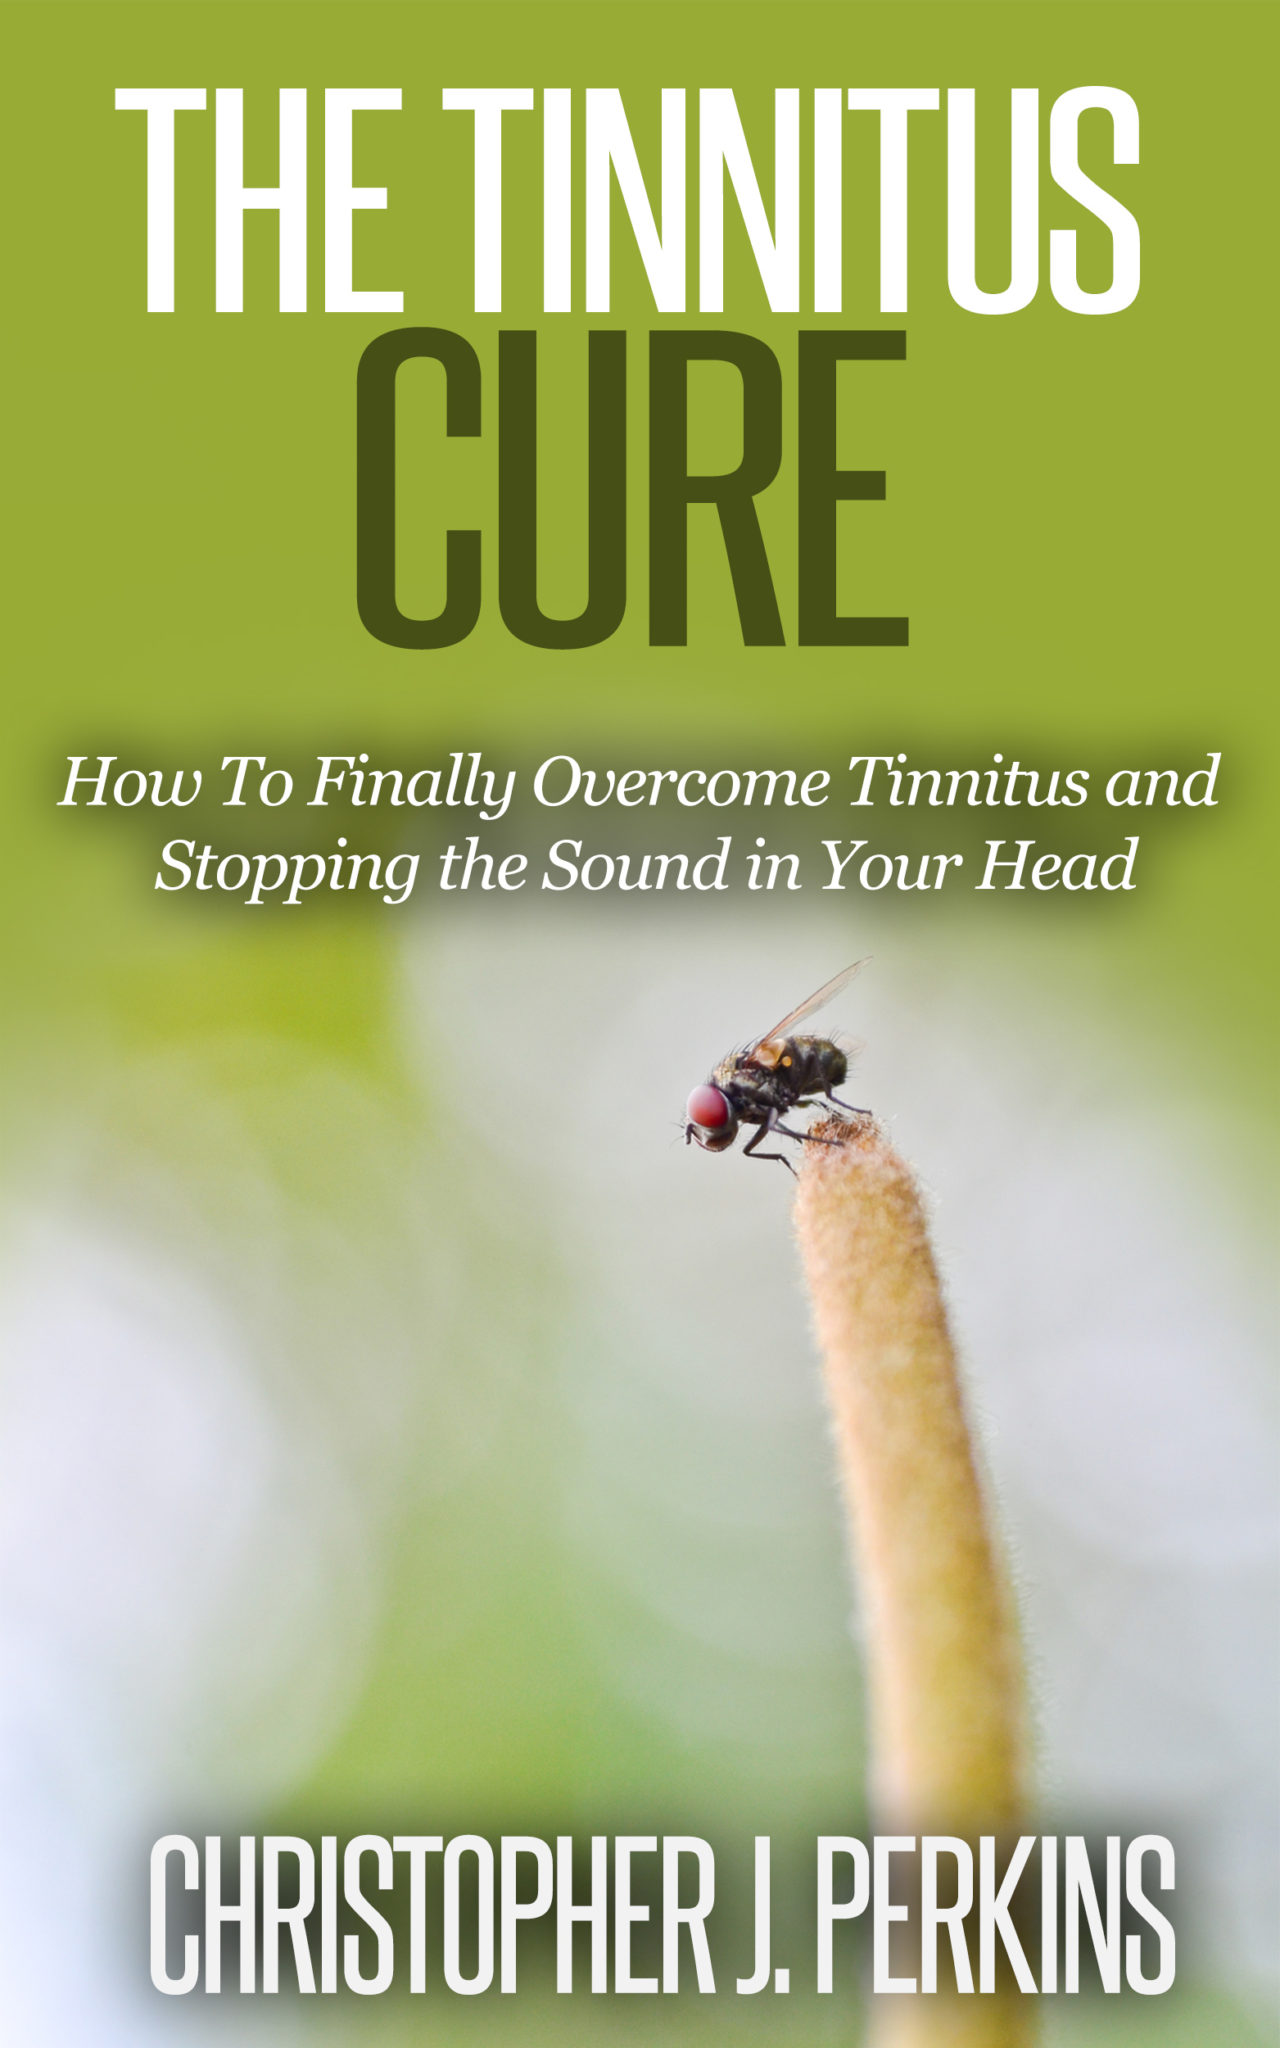 The Tinnitus Cure – How To Finally Overcome Tinnitus and Stopping the Sound in Your Head by Christopher J. Perkins